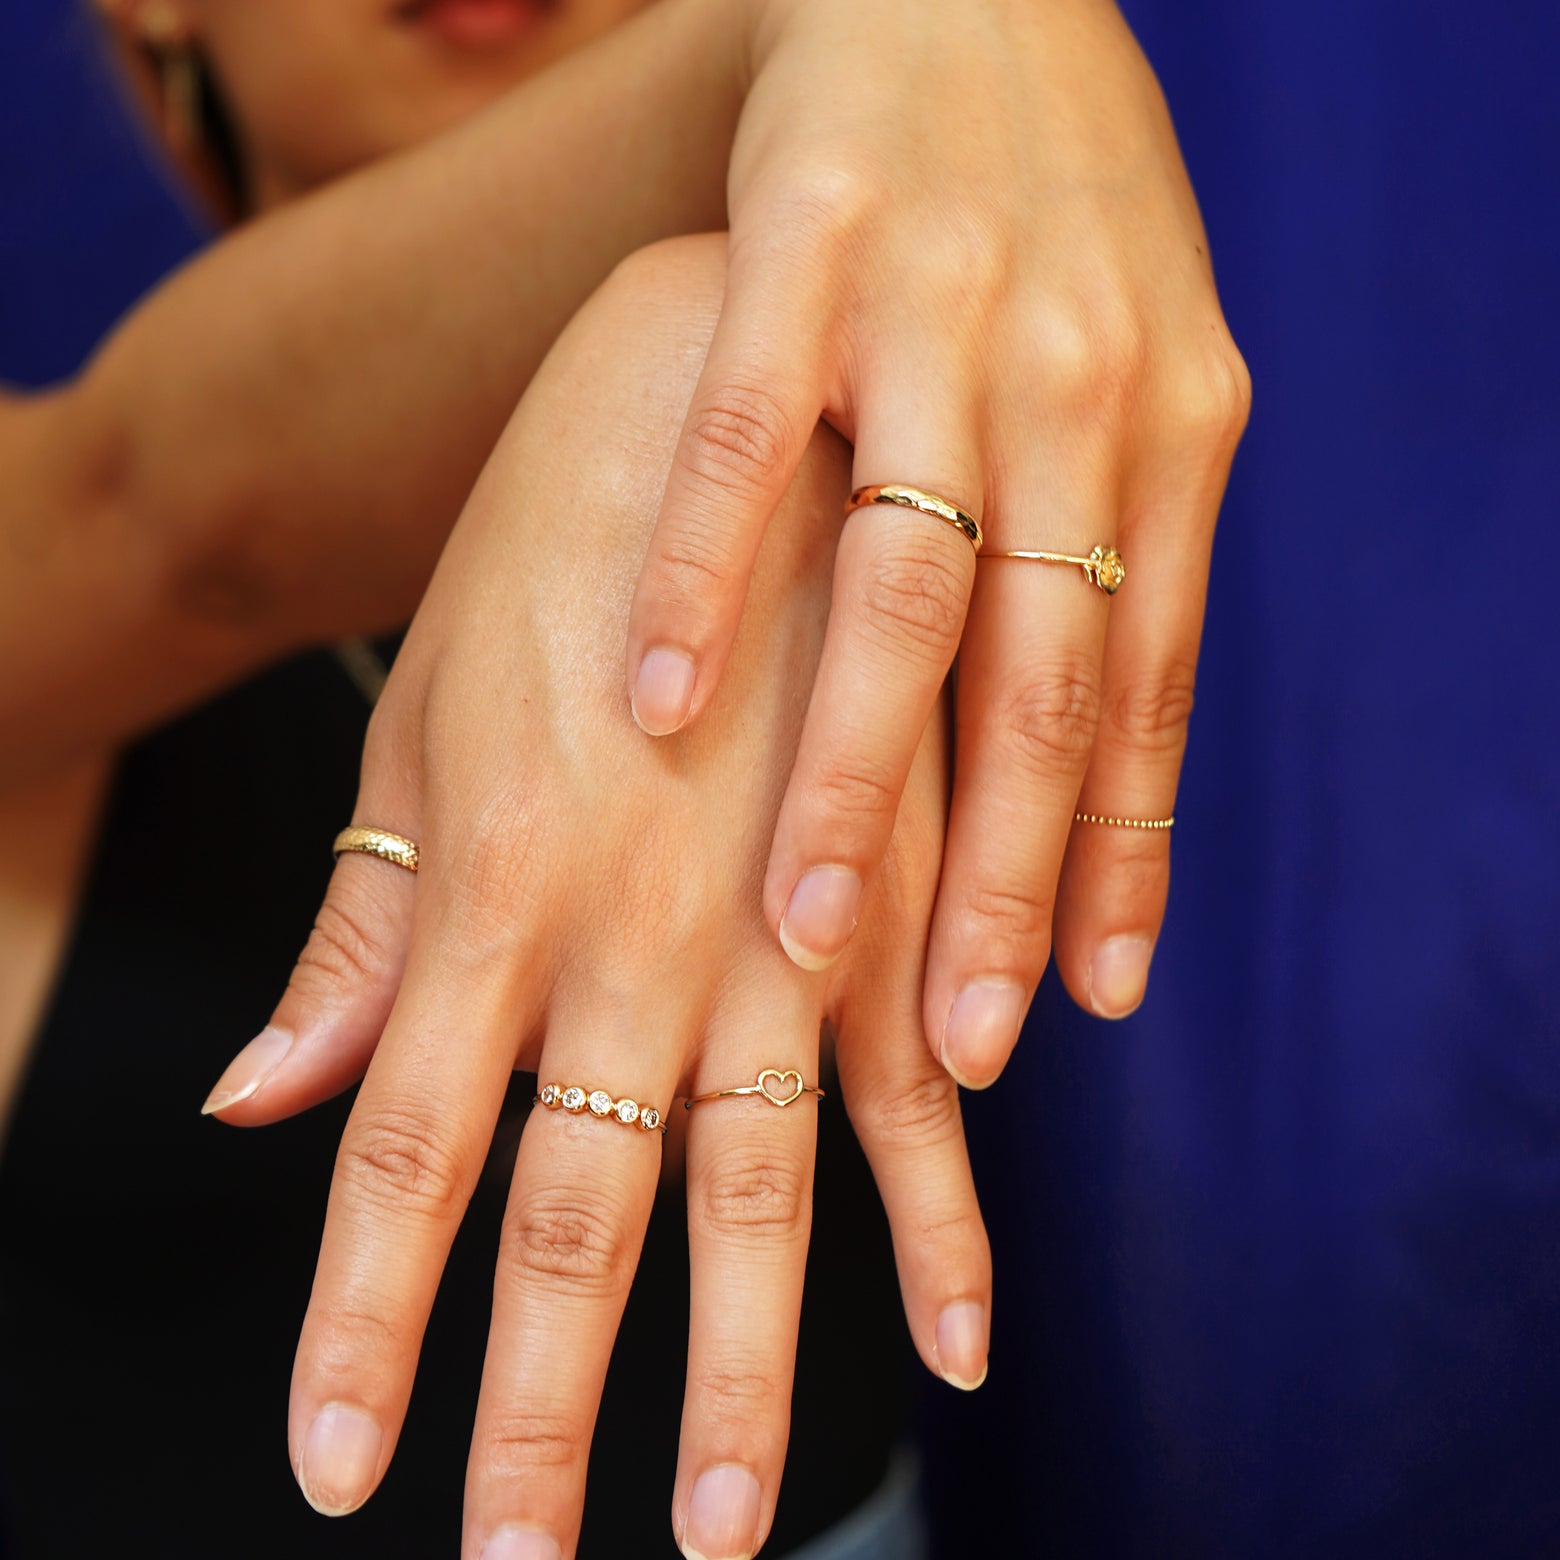 A model posed with their hands out in front of them resting on top of each other wearing various Automic Gold rings